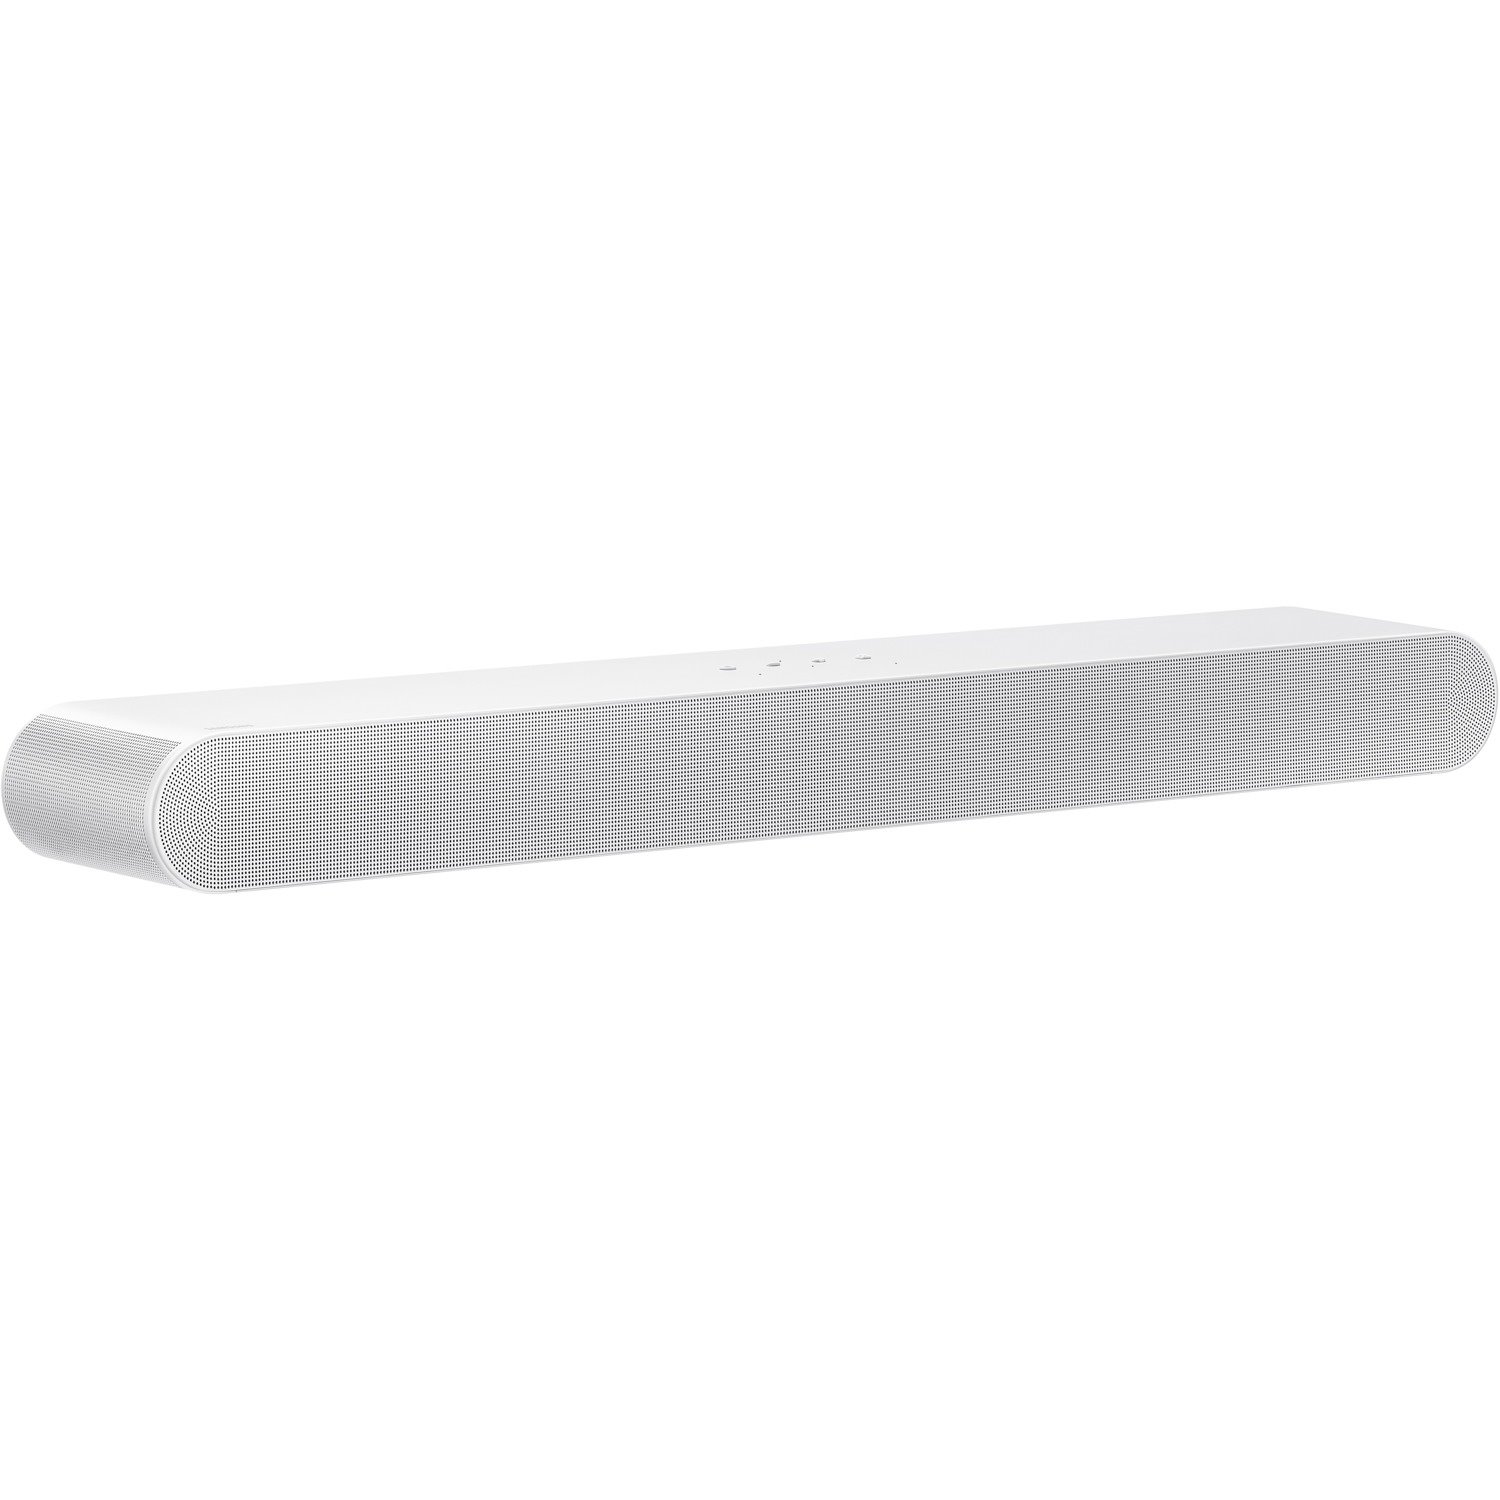 Samsung HW-S61B 11.1.4 Bluetooth Sound Bar Speaker - 41 W RMS - Google Assistant, Alexa Supported - White